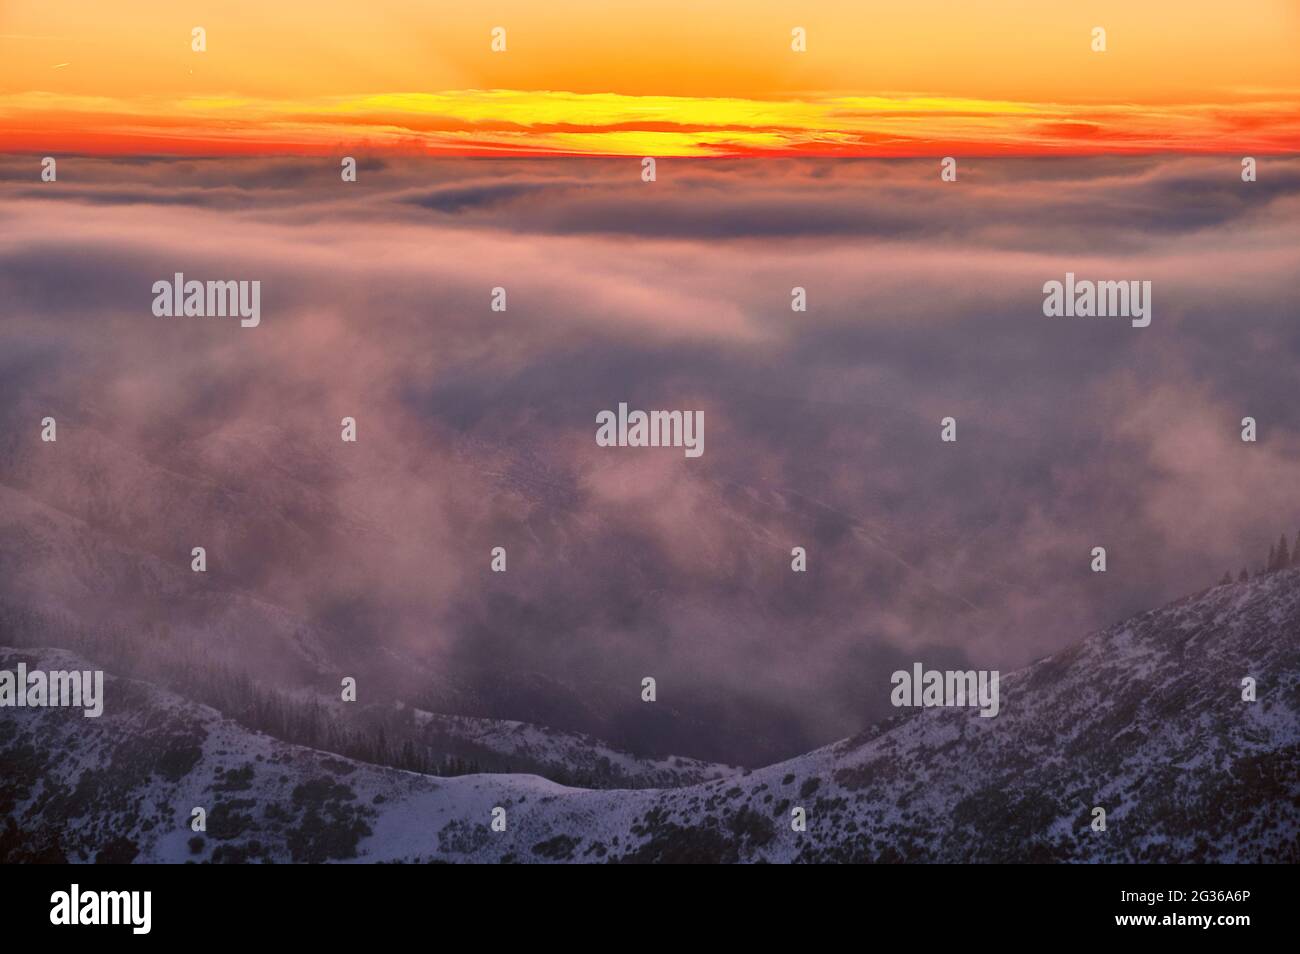 Magical atmosphere of a sunset in the highlands; sunset clouds over snow-capped mountain ridges Stock Photo